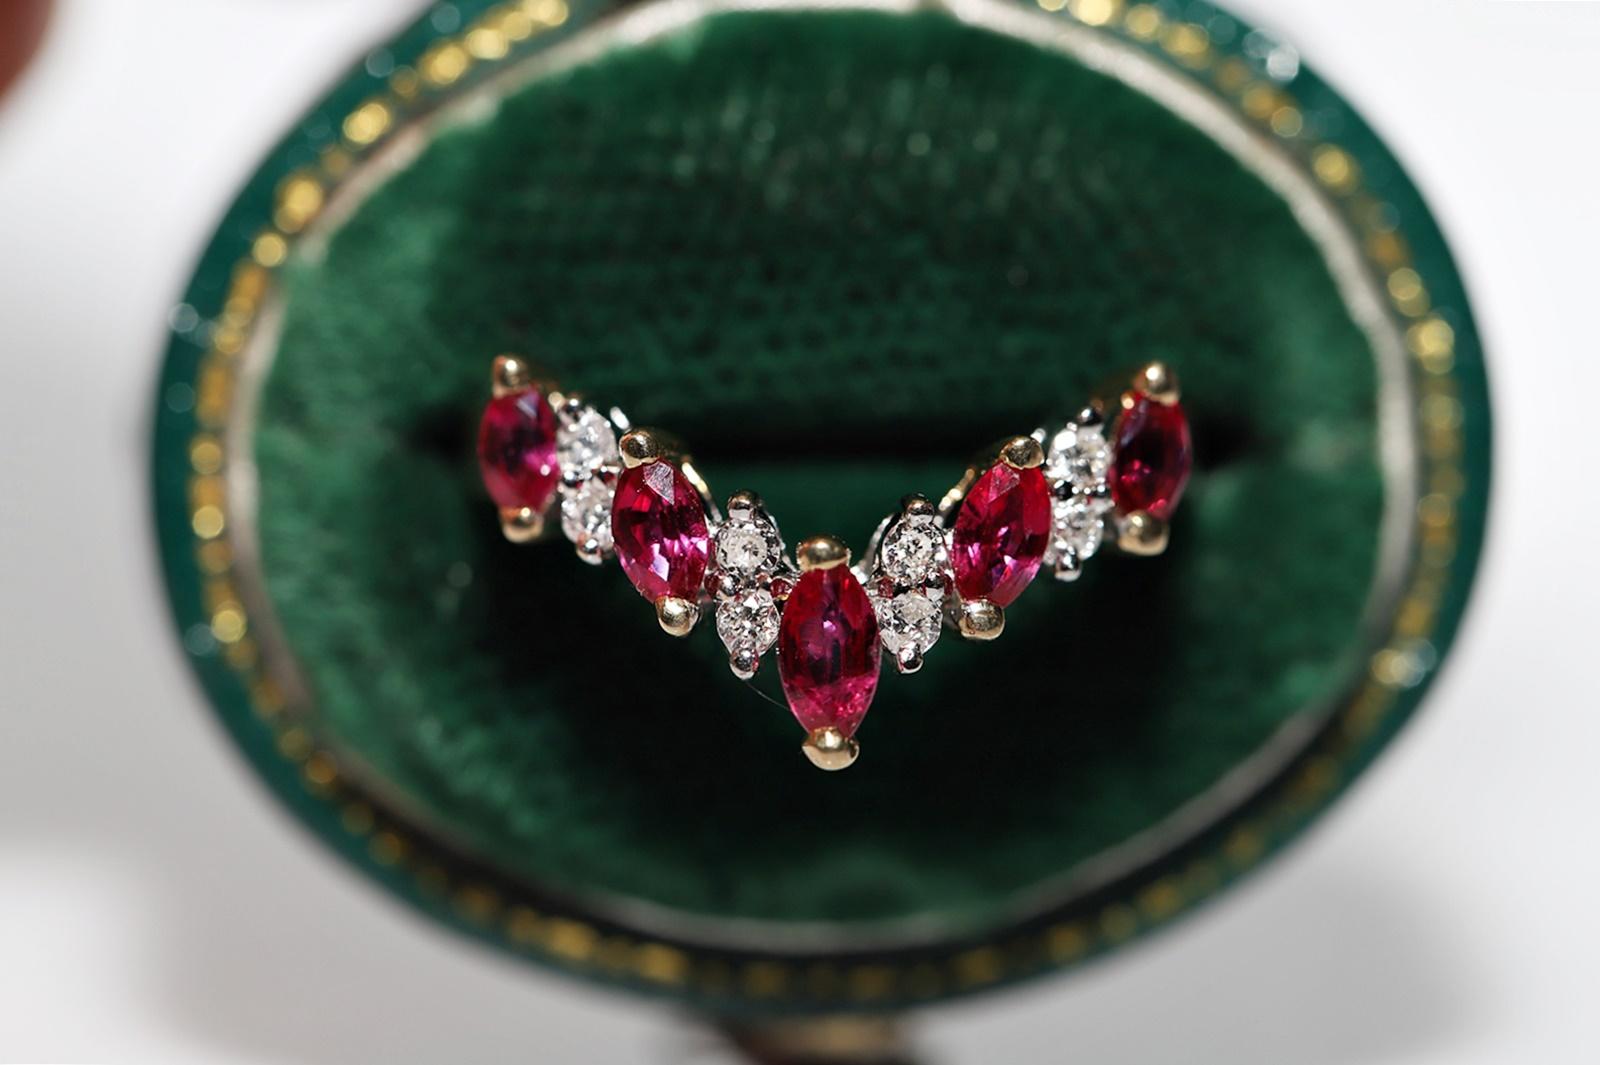  Vintage Circa 1990s 14k Gold Natural Diamond And Ruby Decorated Ring  In Good Condition For Sale In Fatih/İstanbul, 34